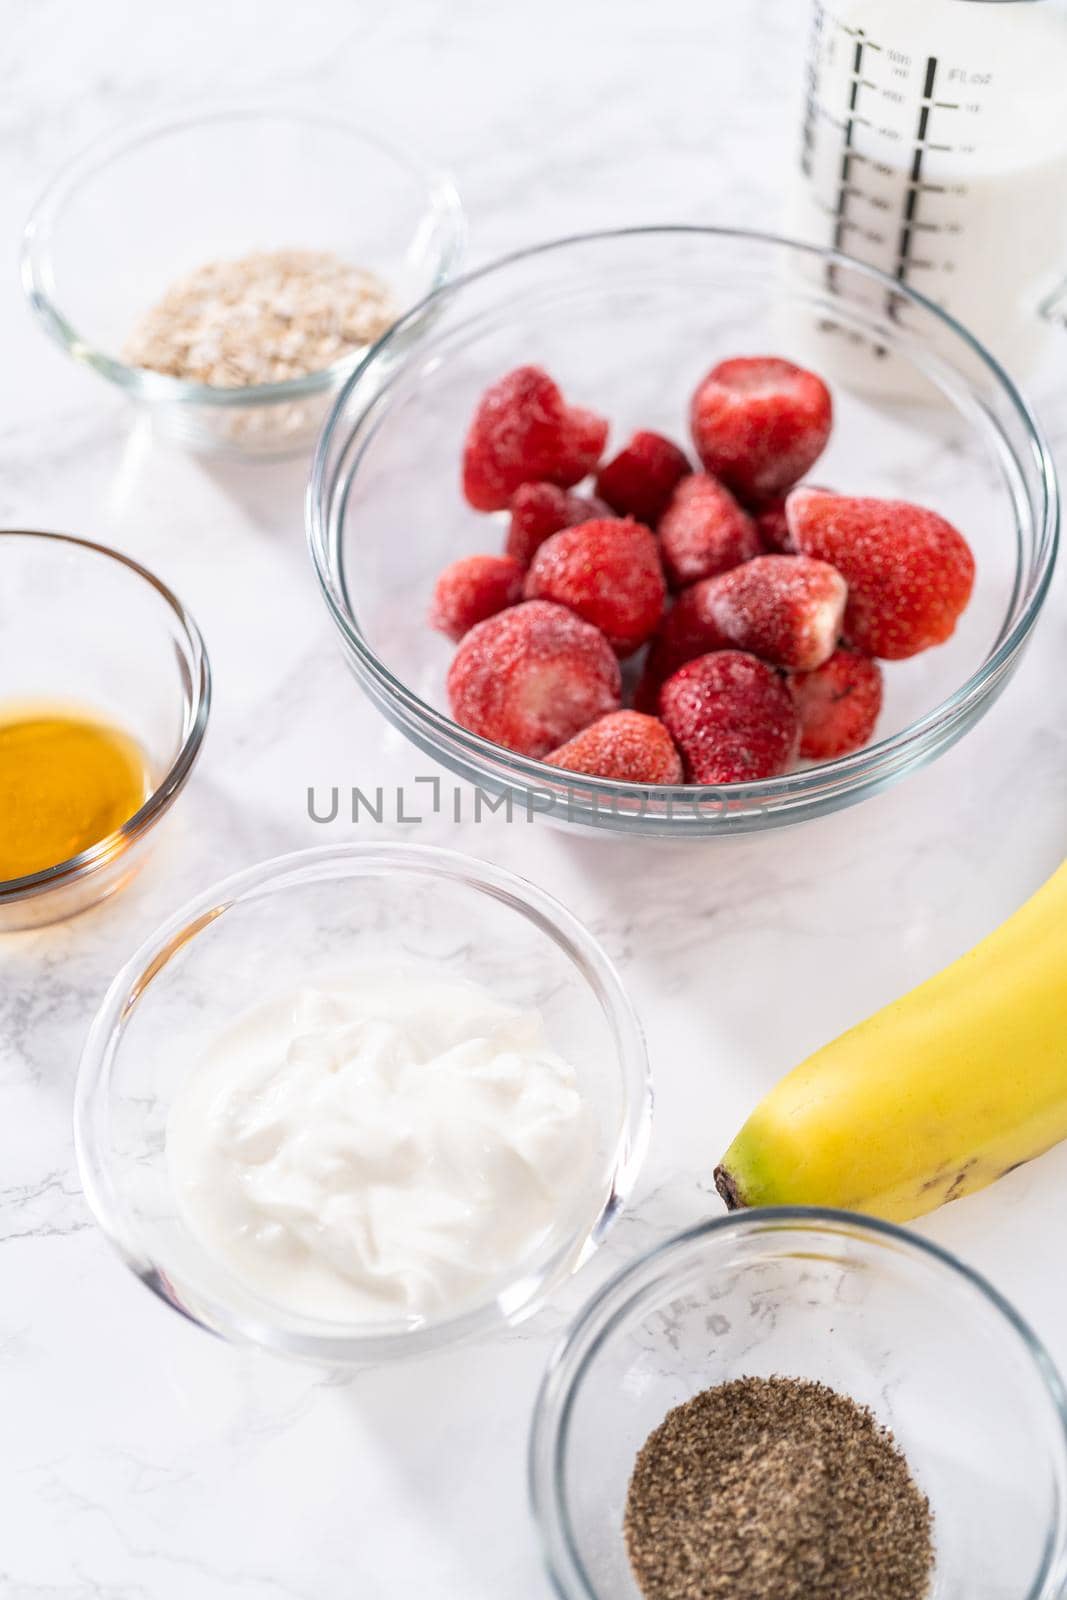 Measured ingredients in a glass mixing bowl to prepare a strawberry banana smoothie.